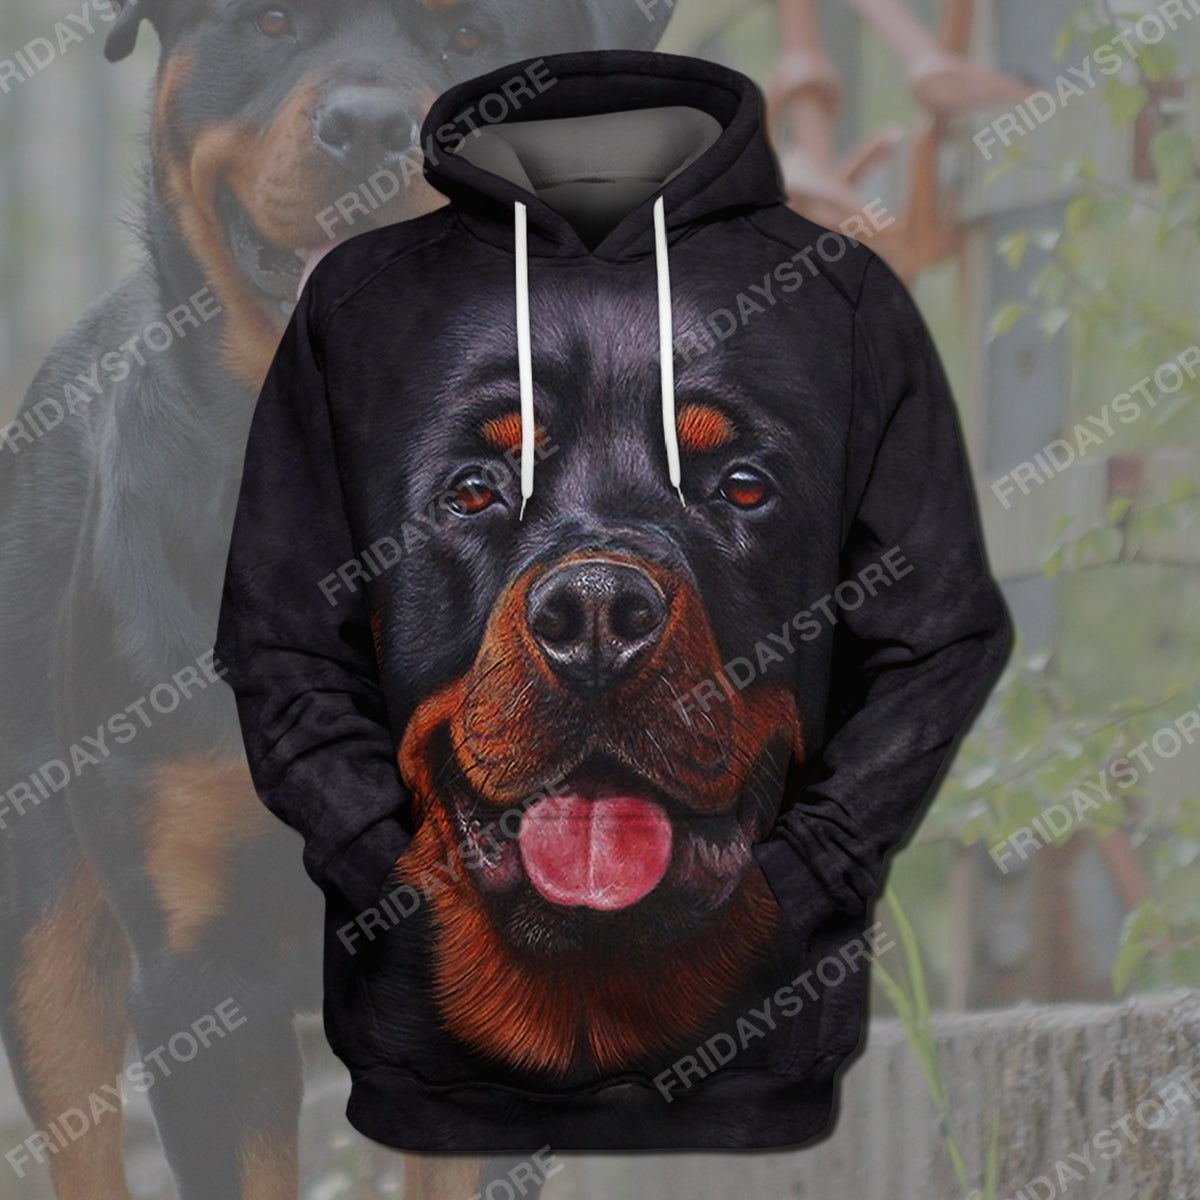 Unifinz Dog Hoodie Rottweiler Hoodie Rottweiler Dog Graphic T Shirt Awesome Dog Shirt Sweater Tank Apparel For Dog Lovers 2022